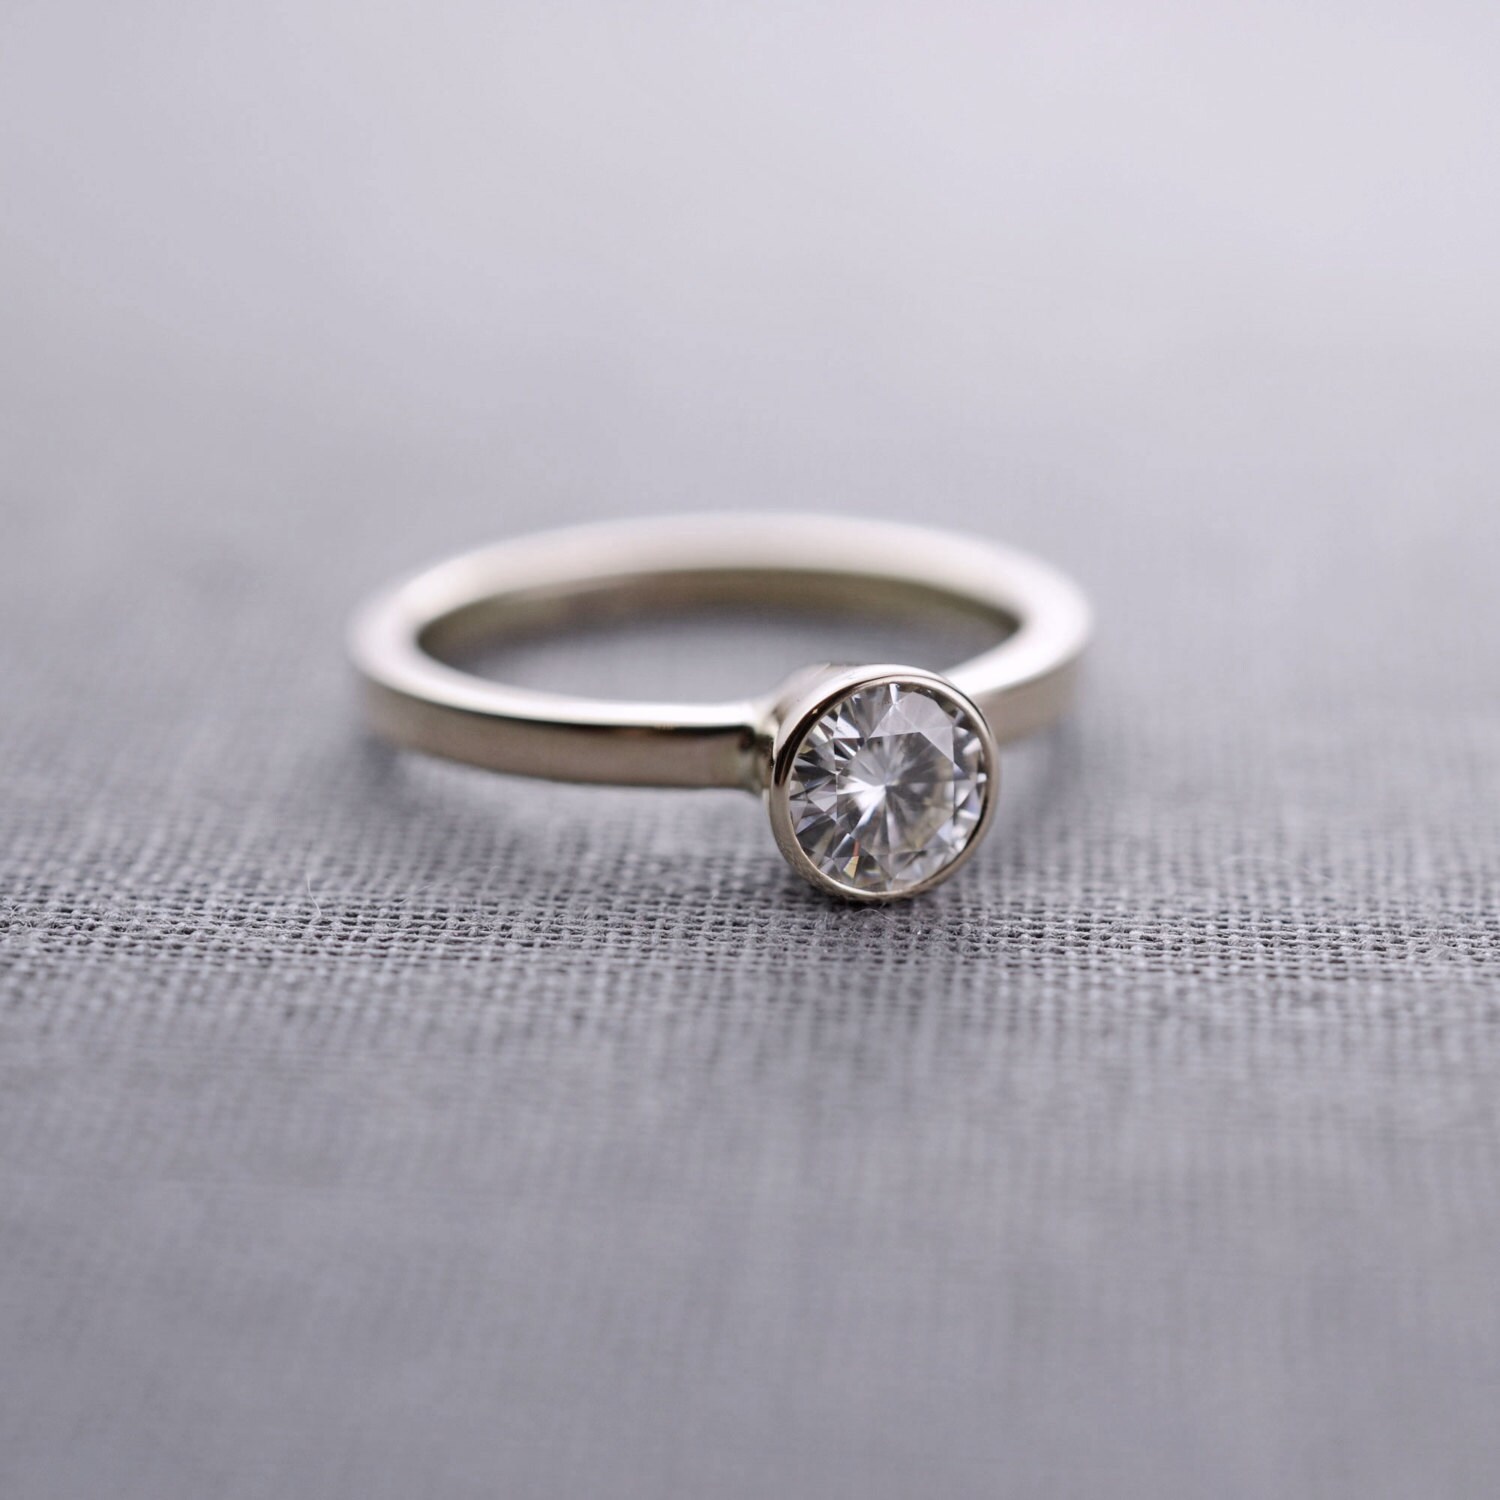 5mm Moissanite Engagement Ring 14K Gold by LilyEmmeJewelry